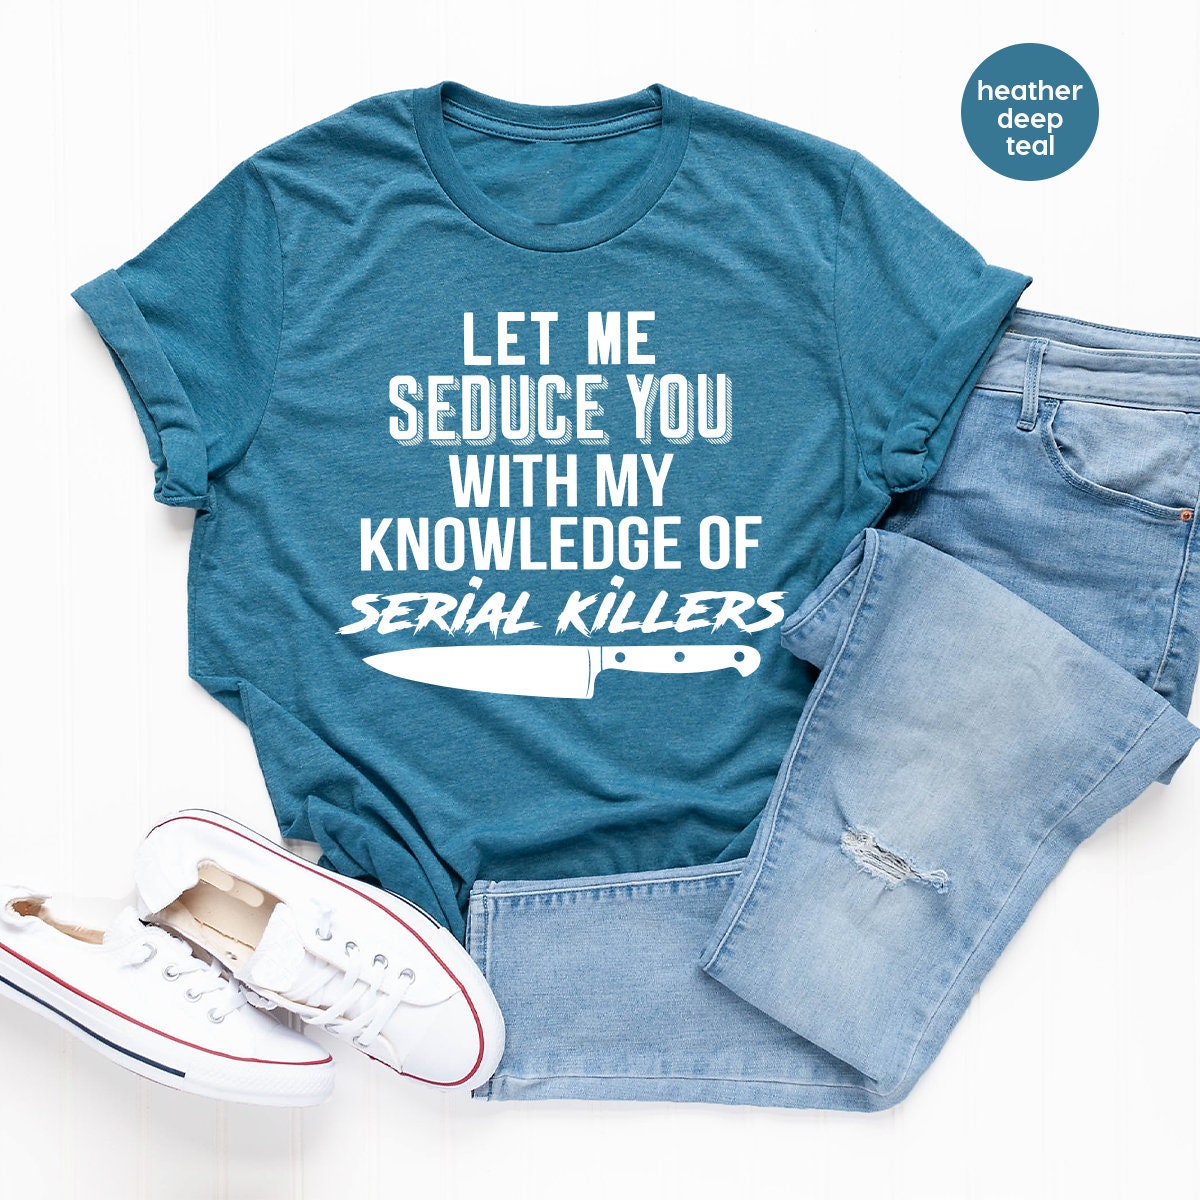 Serial Killer Shirt, Murder T Shirt, Horror TShirt, Crime Lover Gift, Crime Shirts, Let Me Seduce You With my Knowledge Of Serial Killers - Fastdeliverytees.com